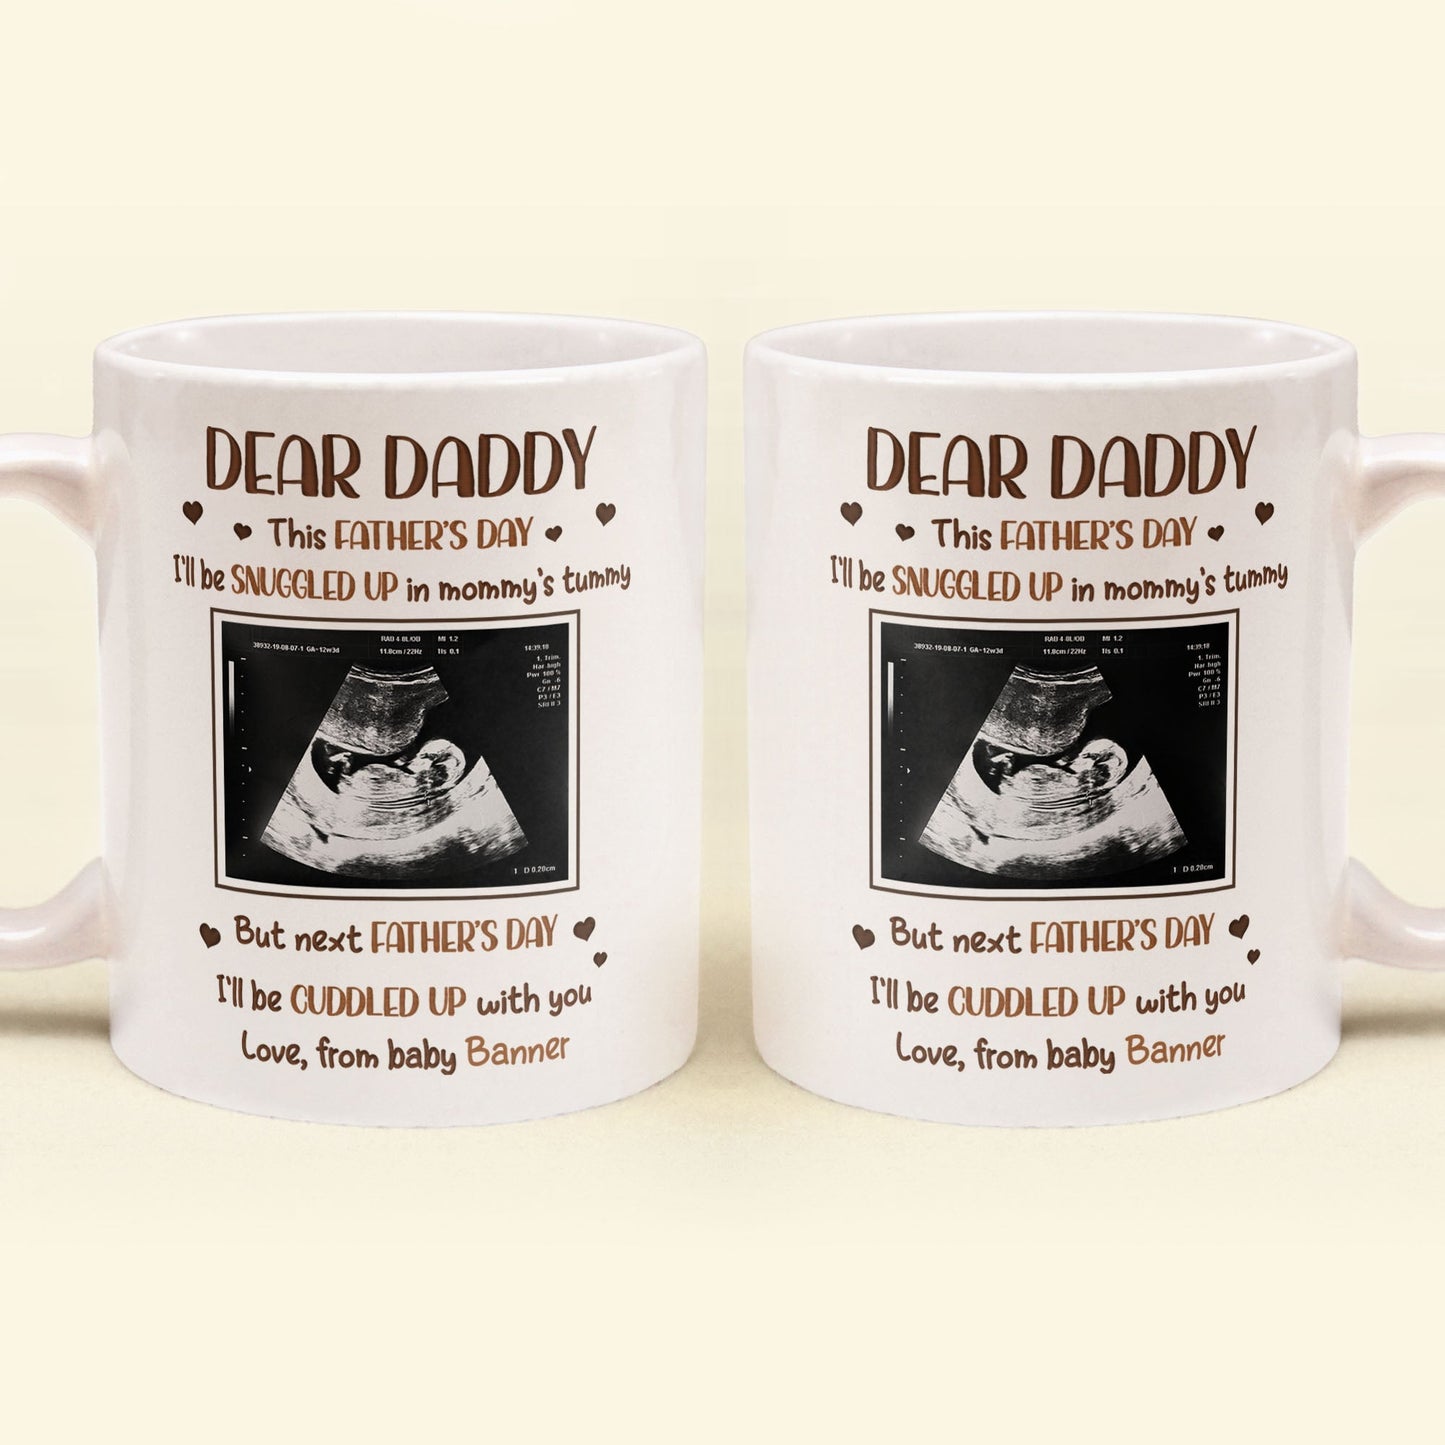 This Father's Day, I'll Be Snuggled Up In Mommy's Tummy - Personalized mug - Father's Day, Birthday, First Father's Day Gift For For Daddy To Be, Gift For Dad, Papa, Father, Daddy - From Bump, Baby